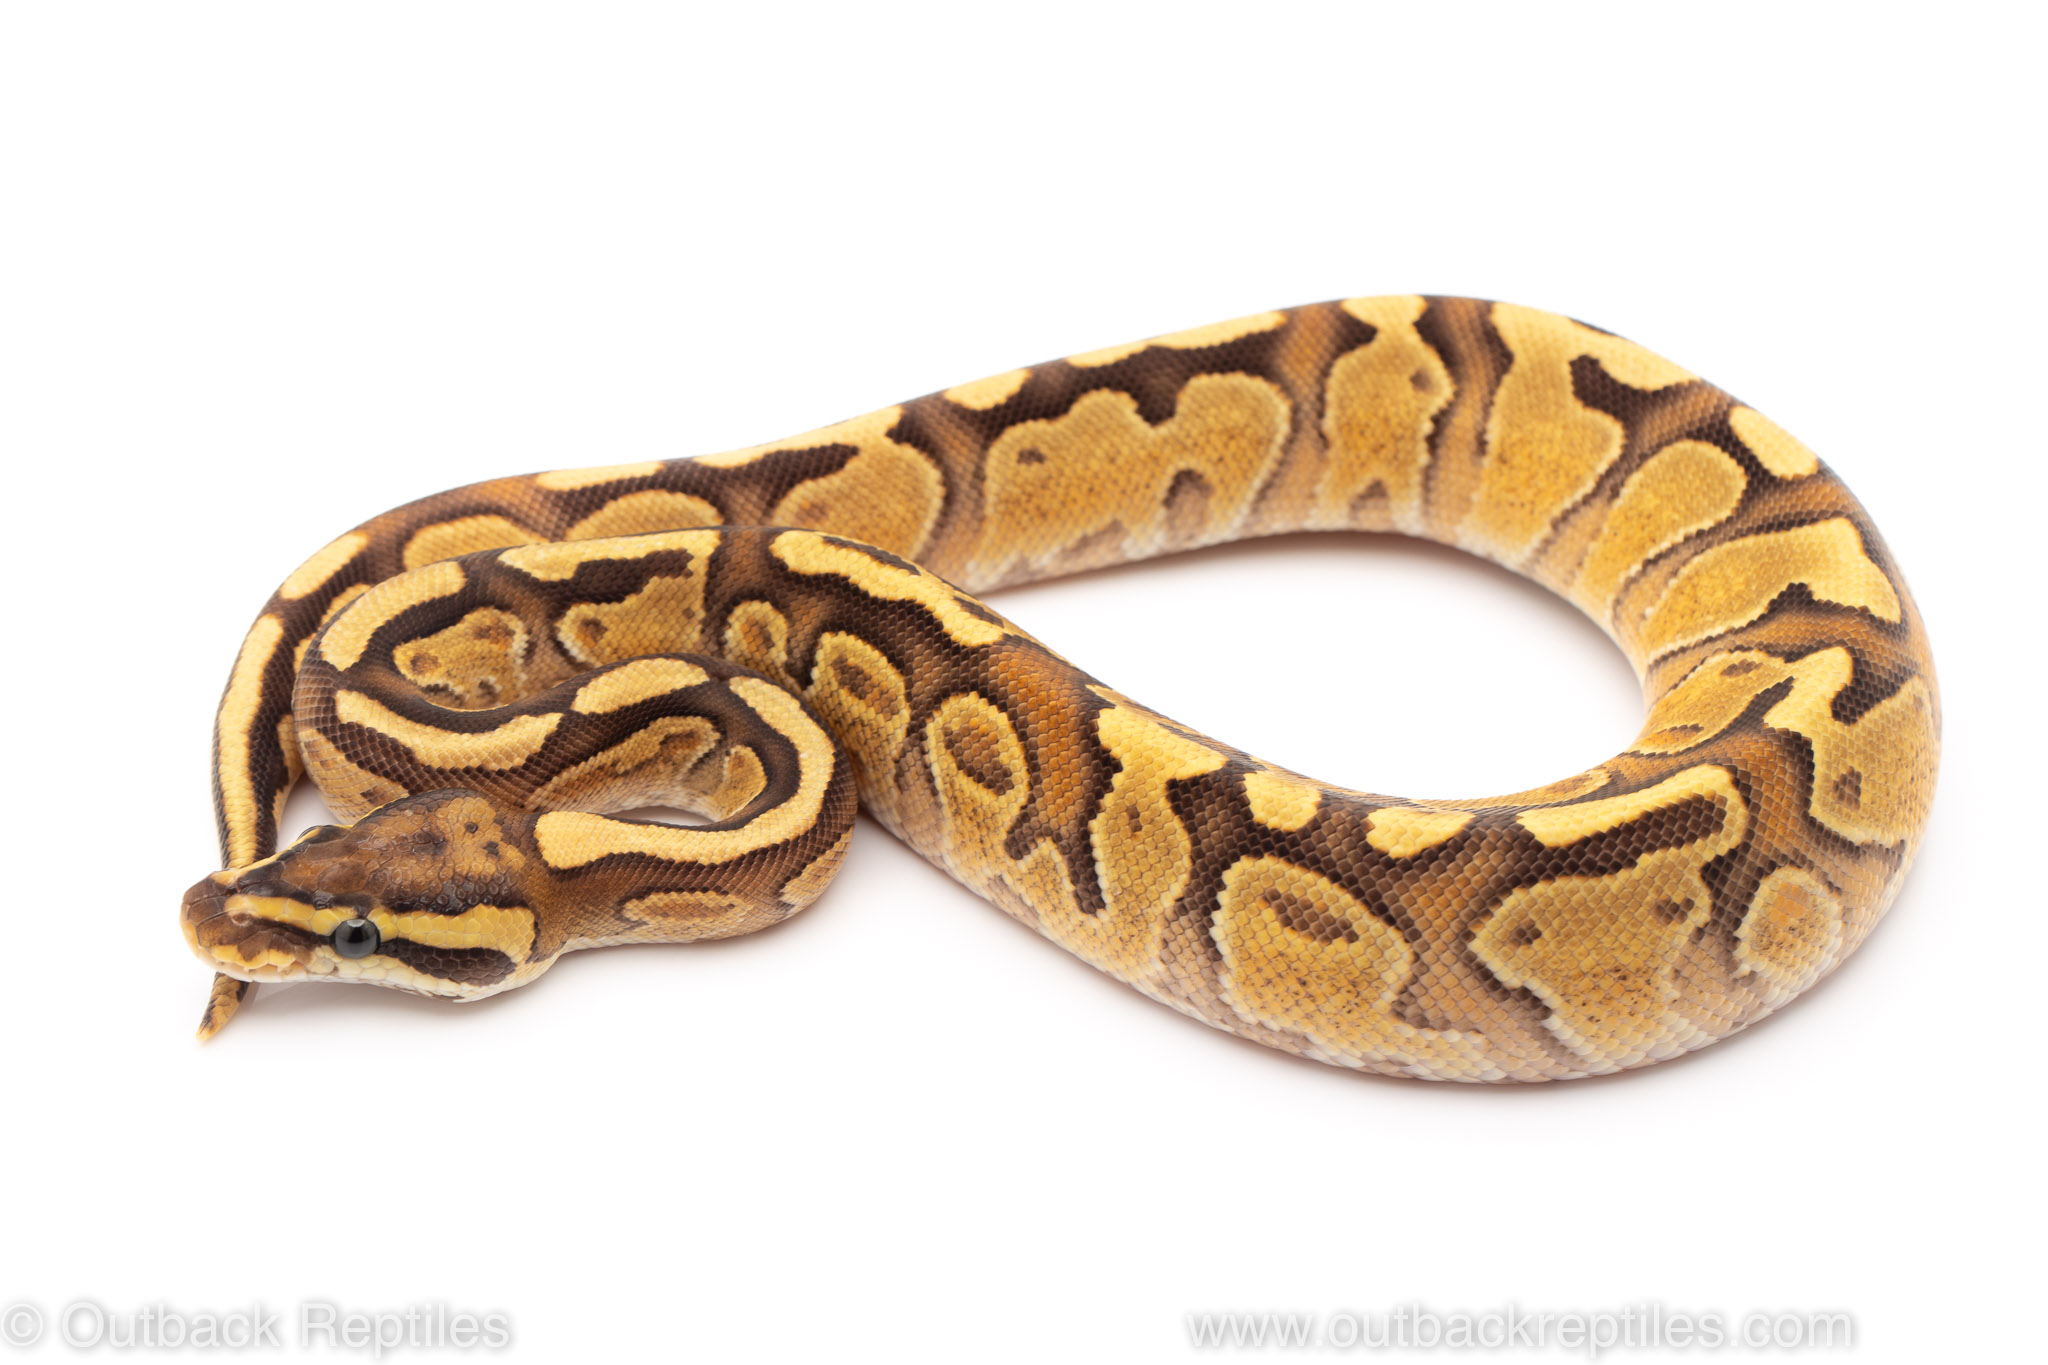 fire enchi special ball python for sale